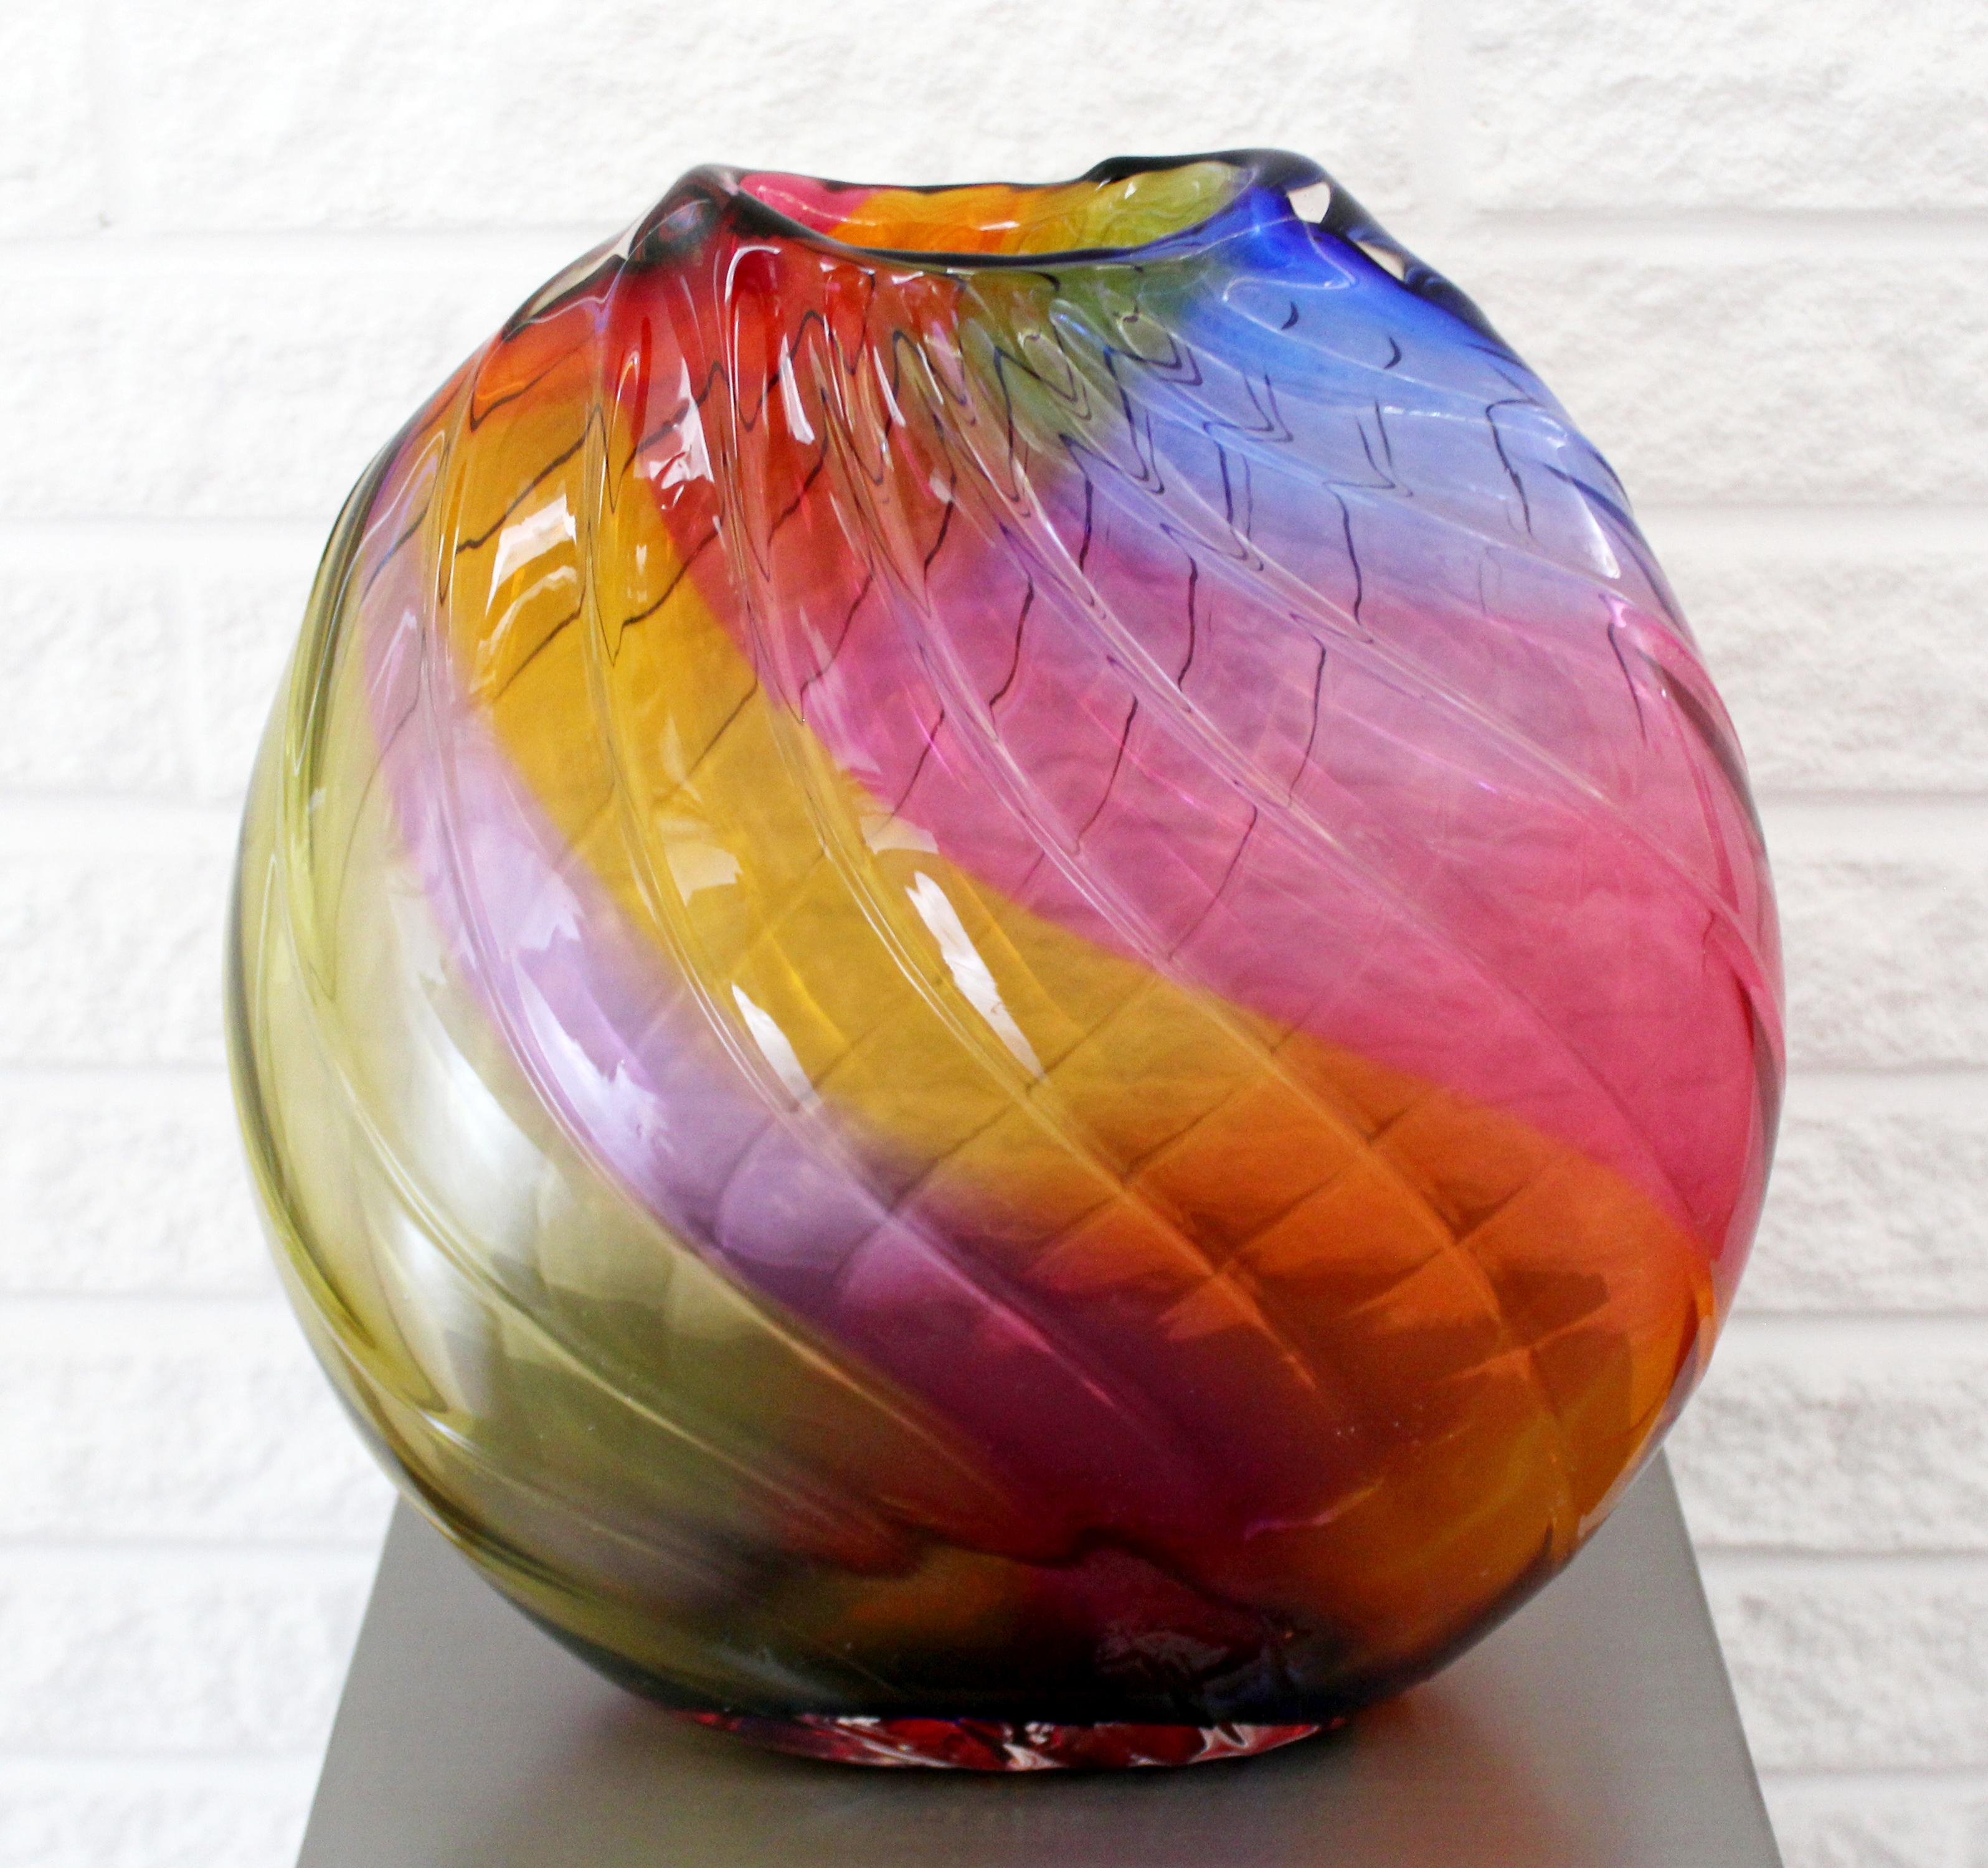 For your consideration is a magnificent, rainbow Murano glass vessel vase, made in Italy, signed, circa 1970s. In excellent condition. The dimensions are 12